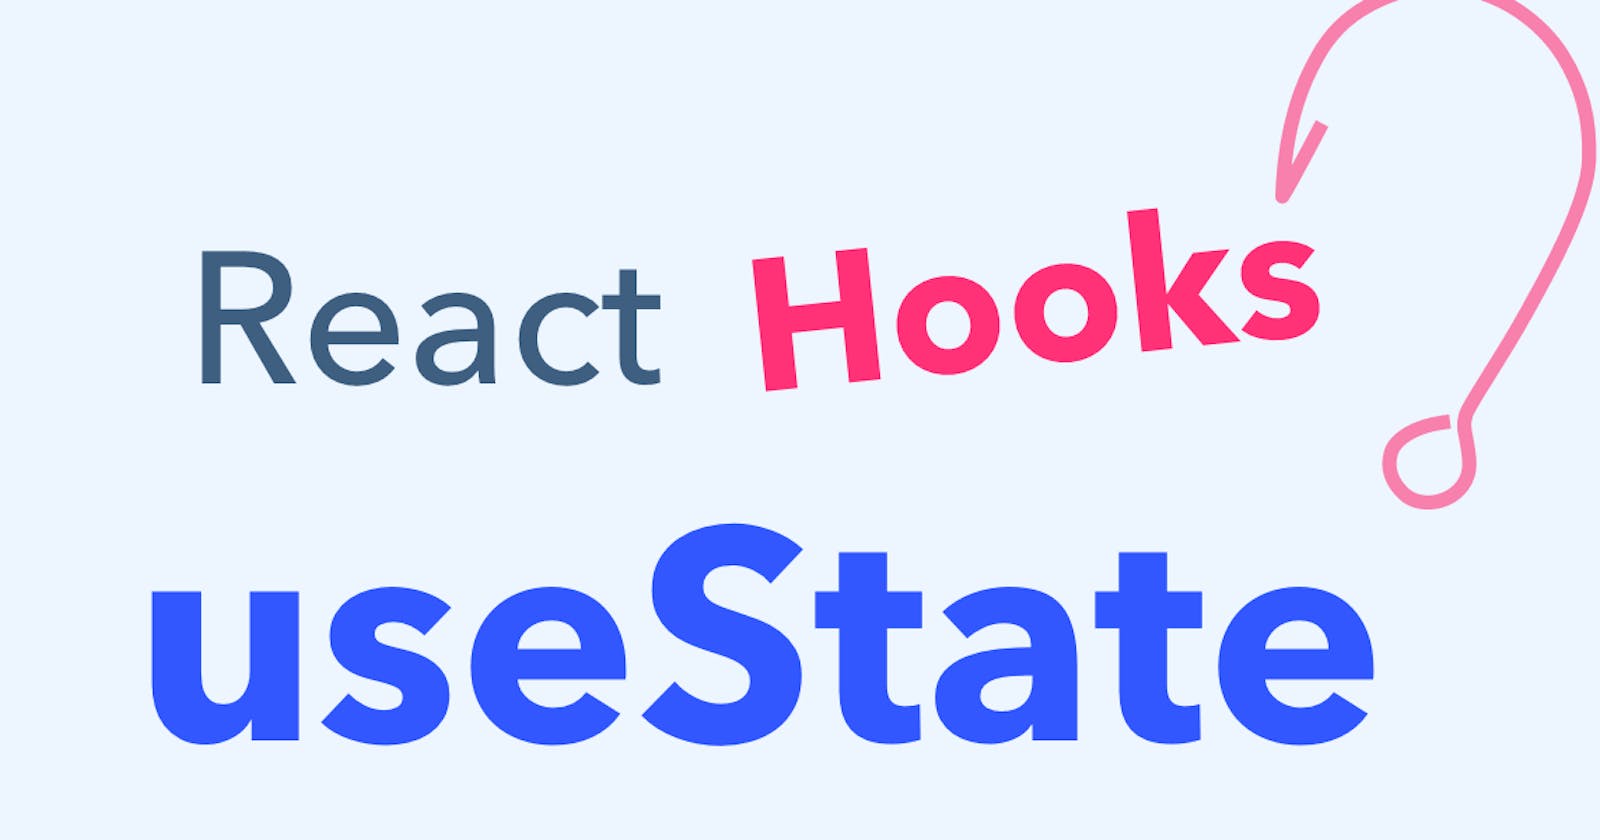 Mastering useState: A Guide for Beginners